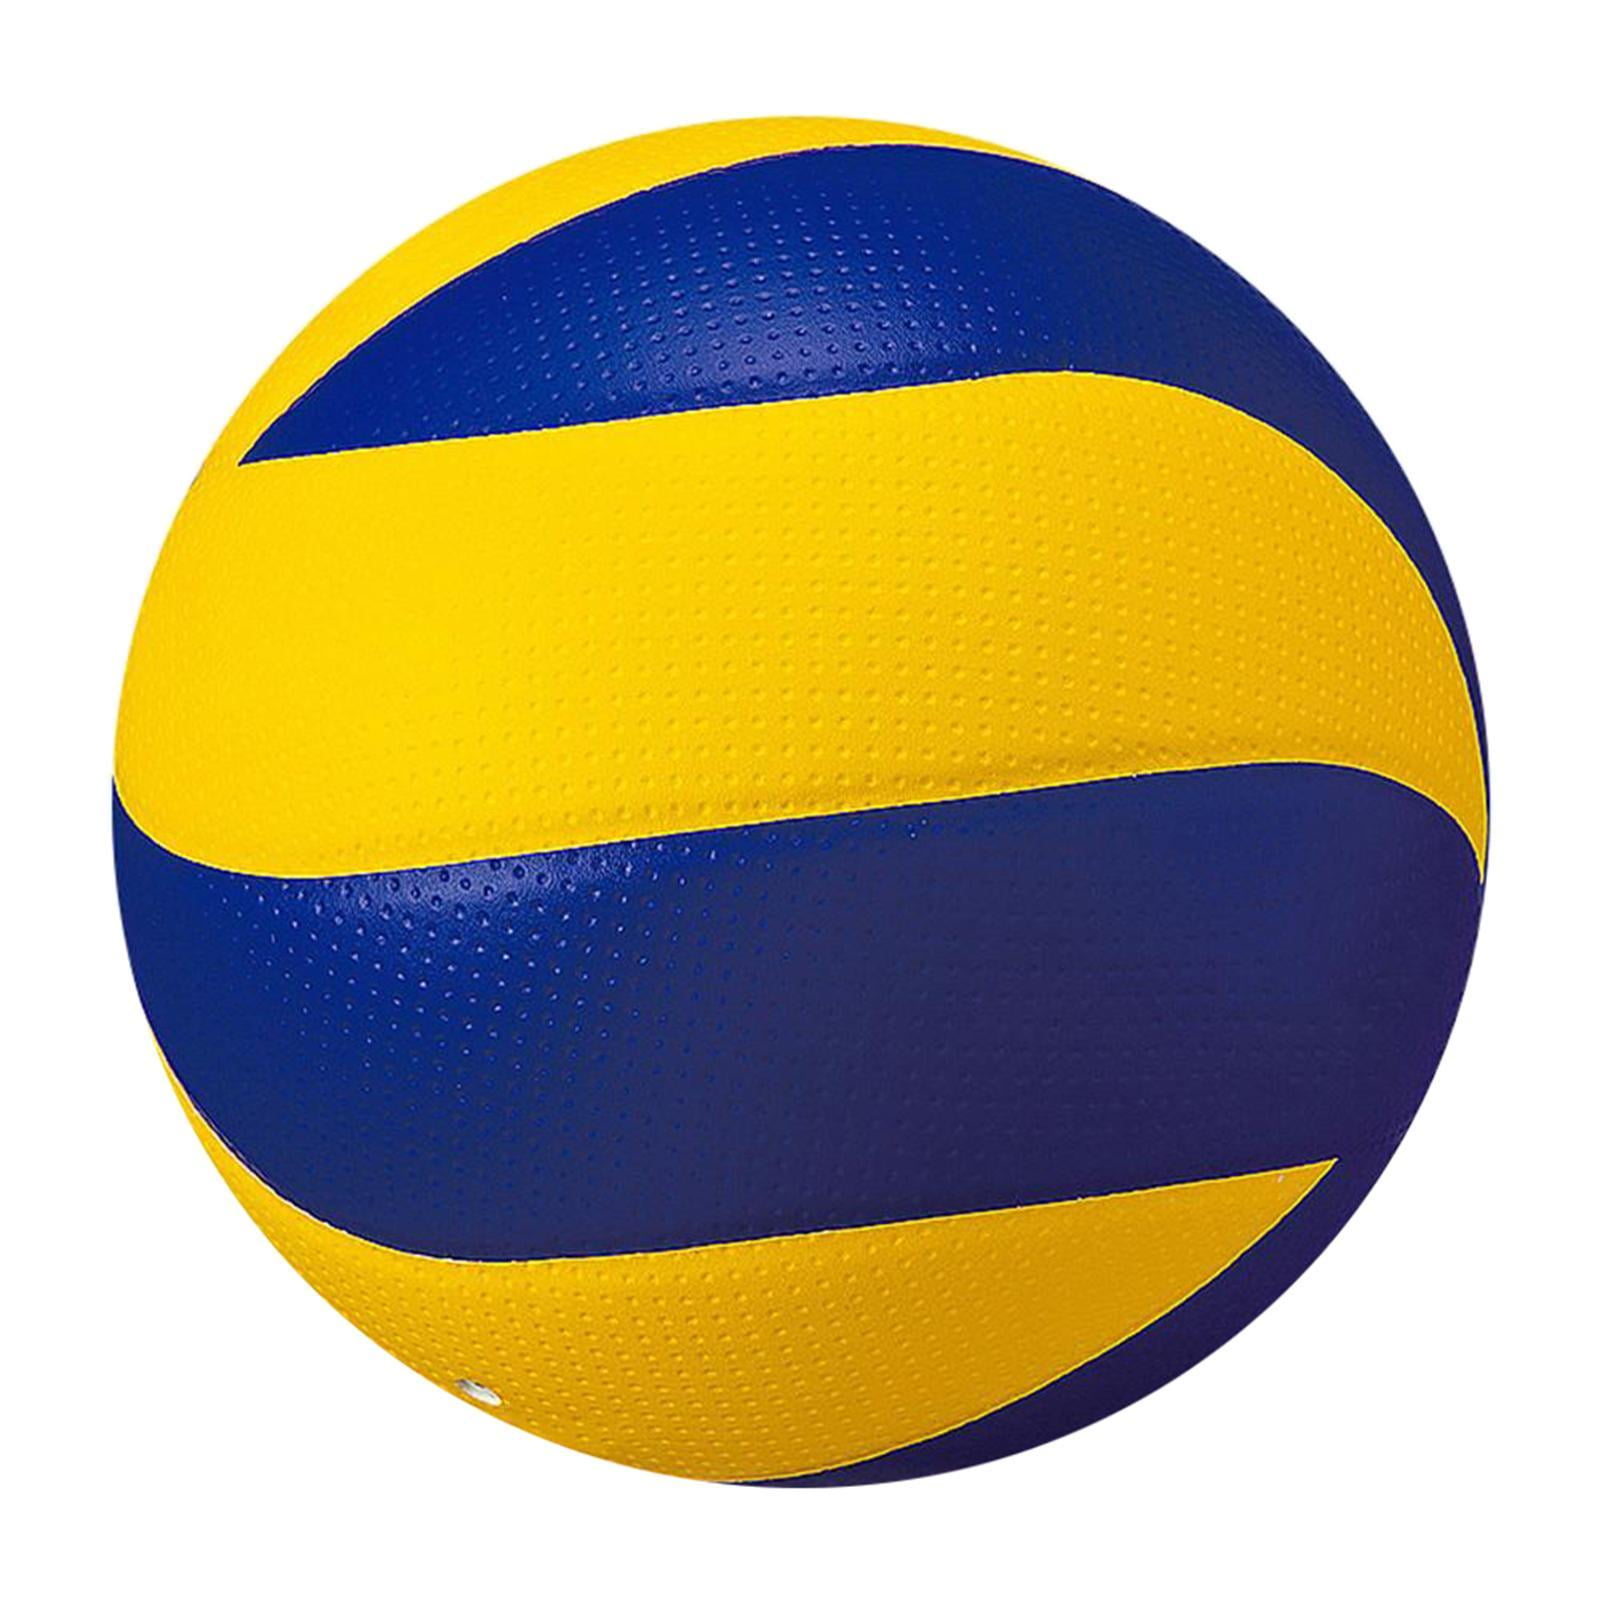 Volleyball Official Size 5 PU Soft Touch Training Ball Indoor Outdoor Beach Game 